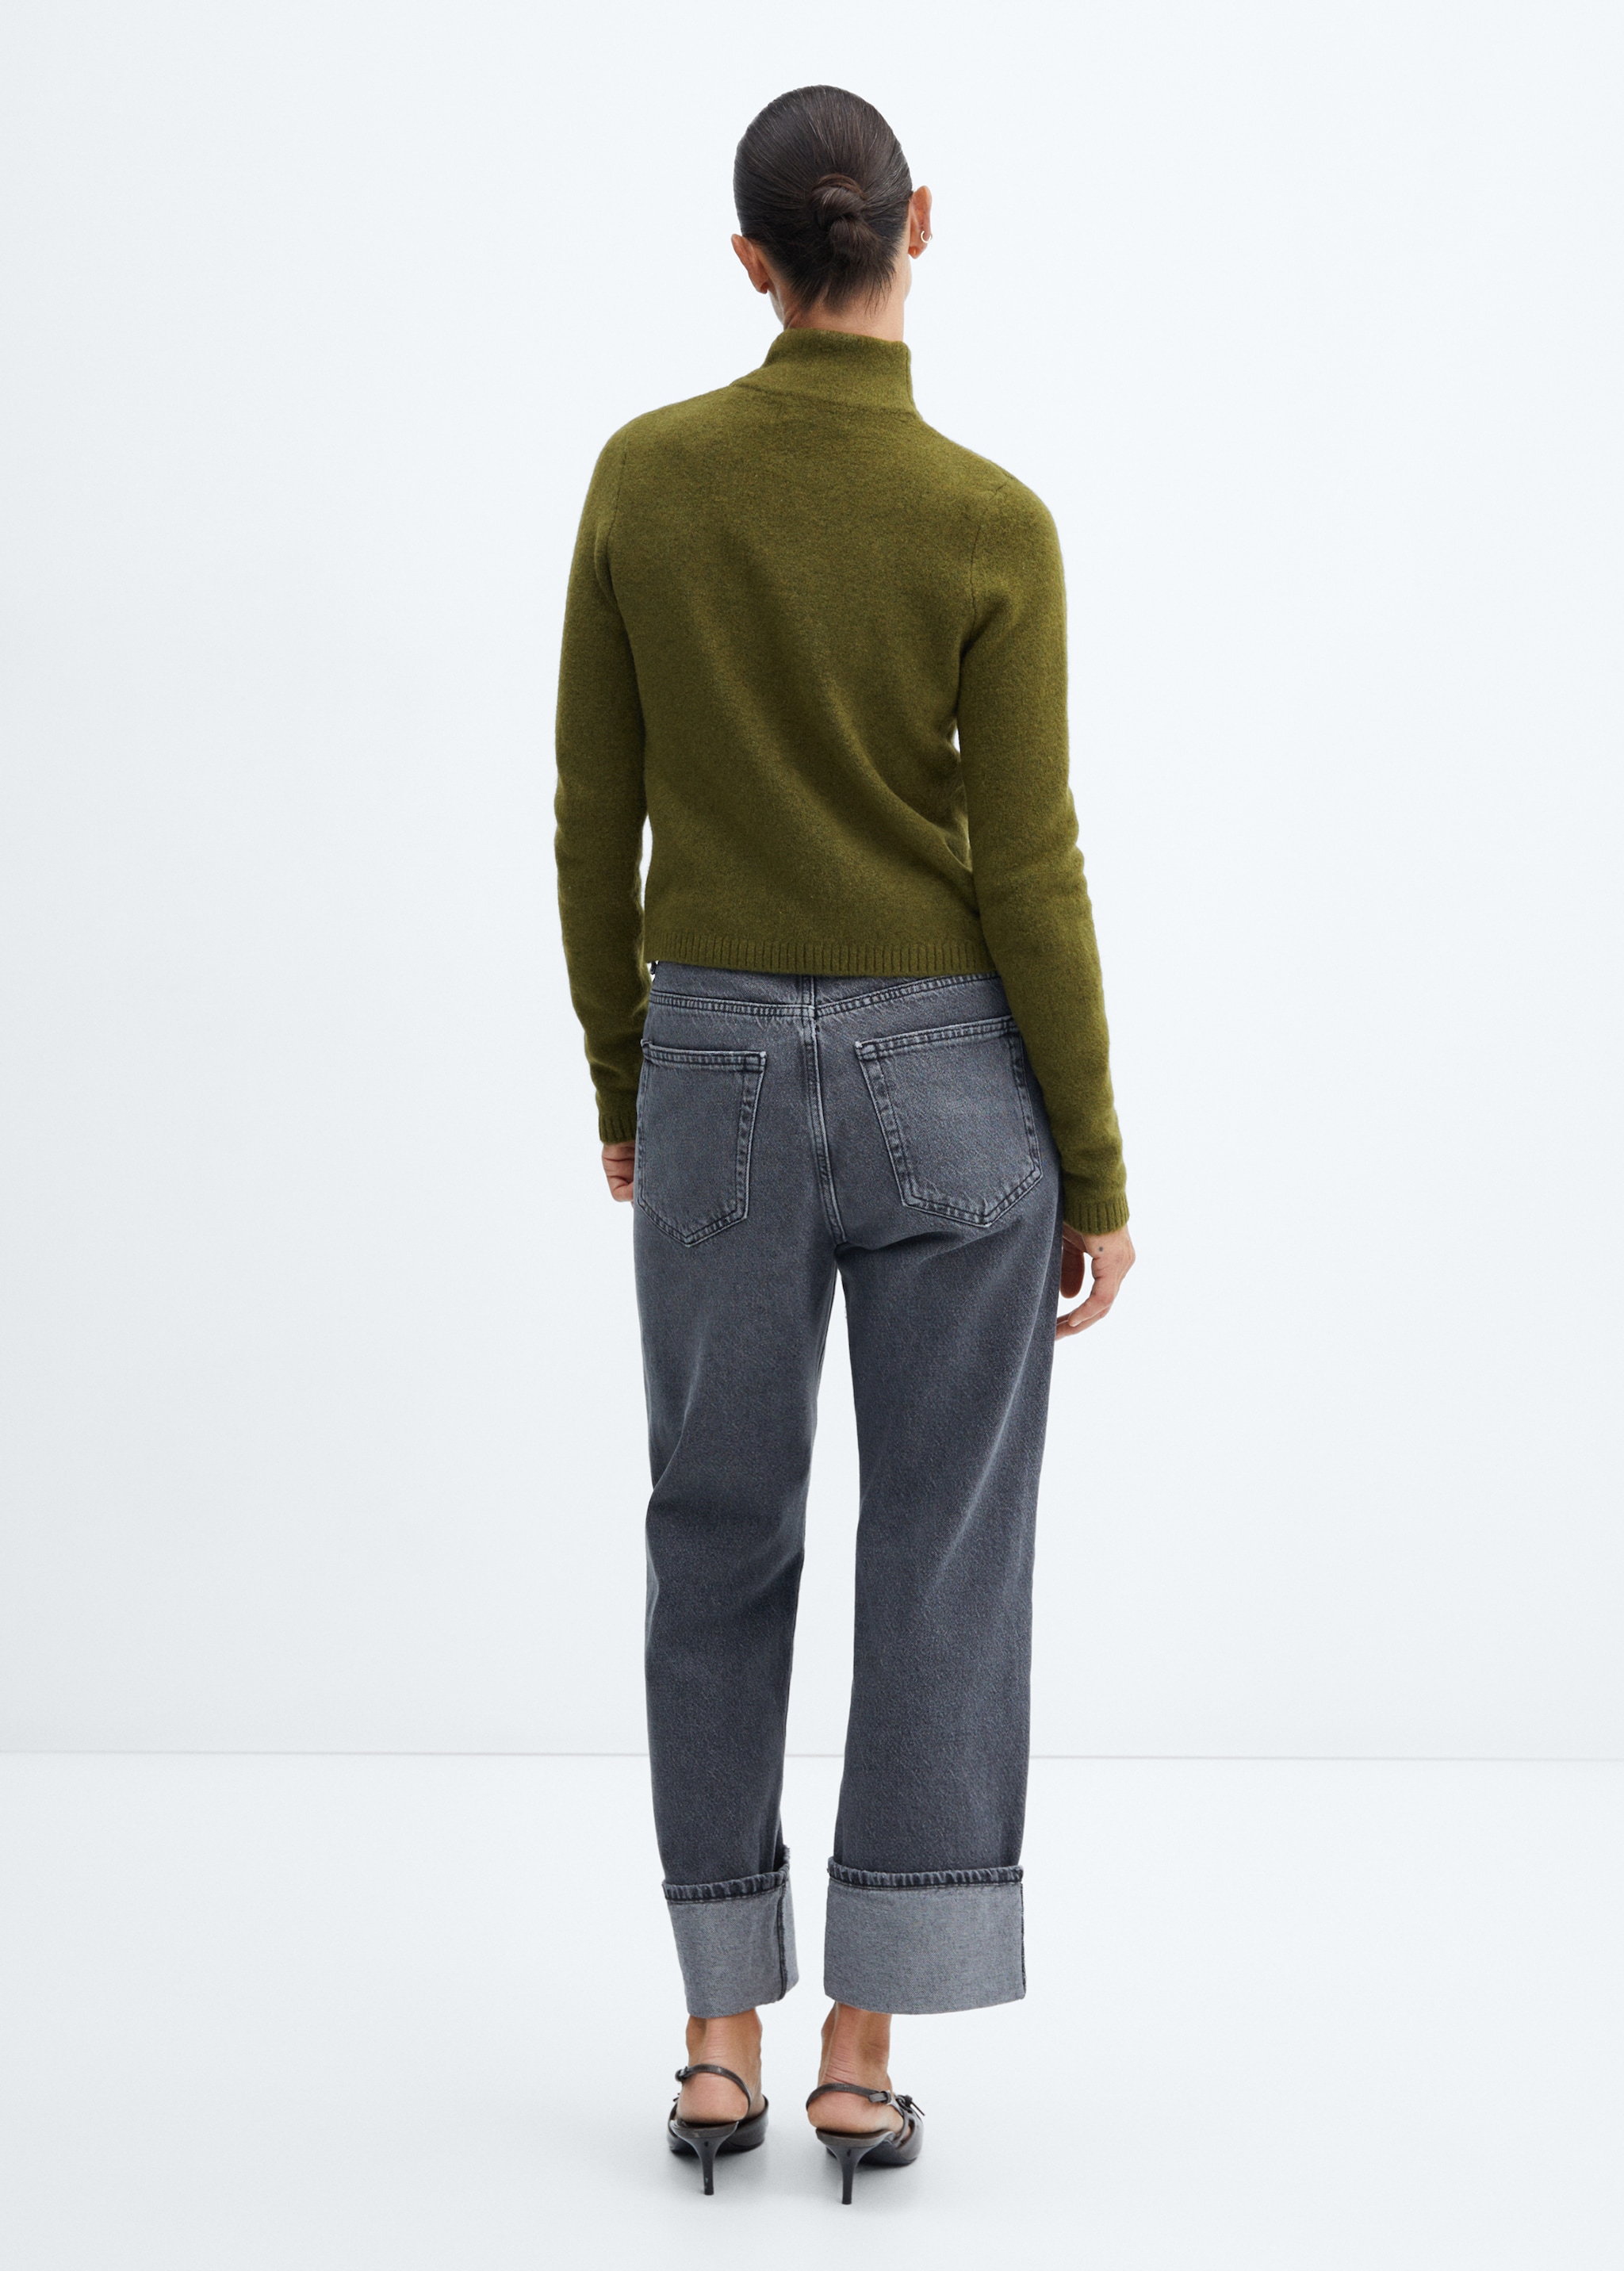 Turtleneck knit sweater - Reverse of the article